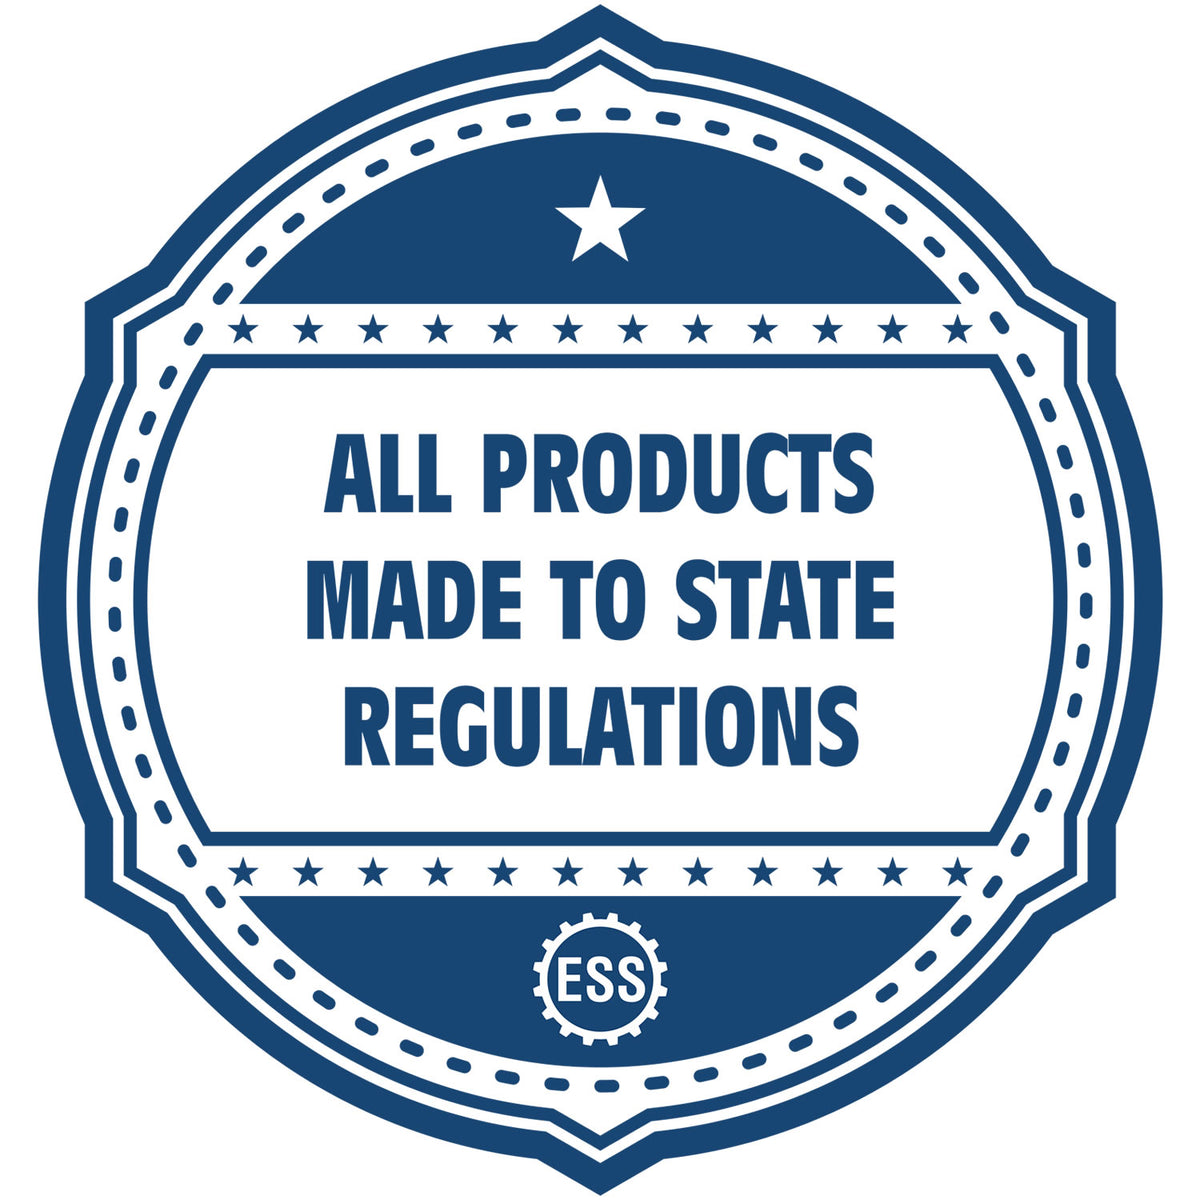 A blue icon or badge for the Slim Pre-Inked Rhode Island Professional Geologist Seal Stamp showing that this product is made in compliance with state regulations.